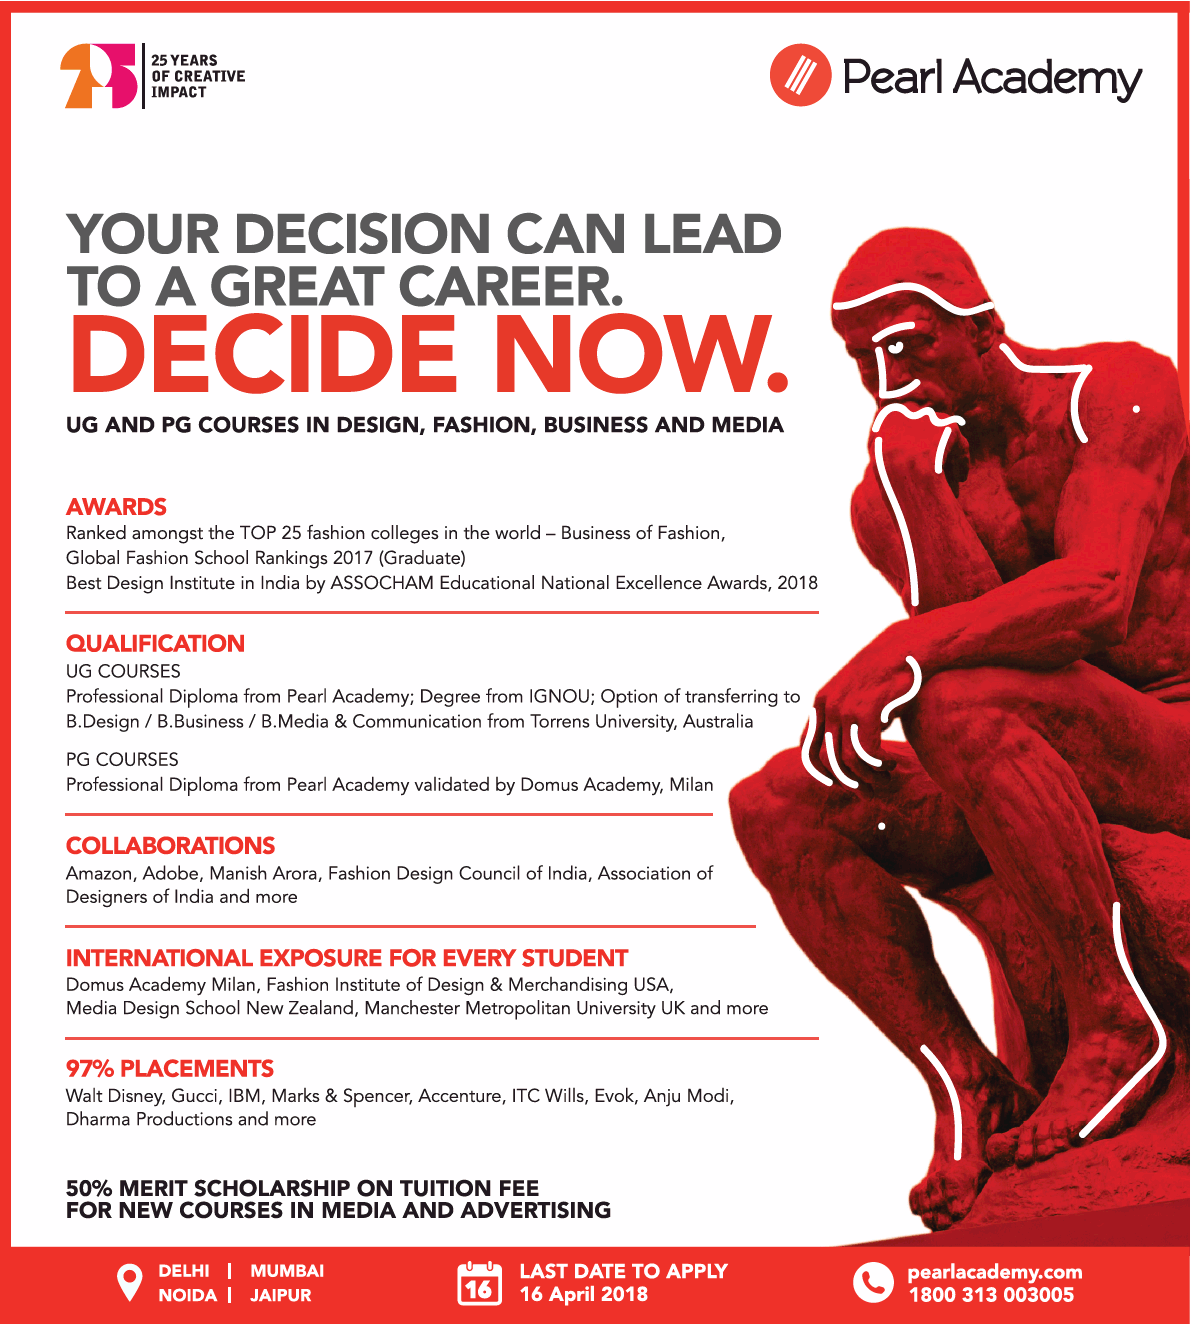 pearl-academy-your-decision-can-lead-to-a-great-career-decide-now-ad-advert-gallery